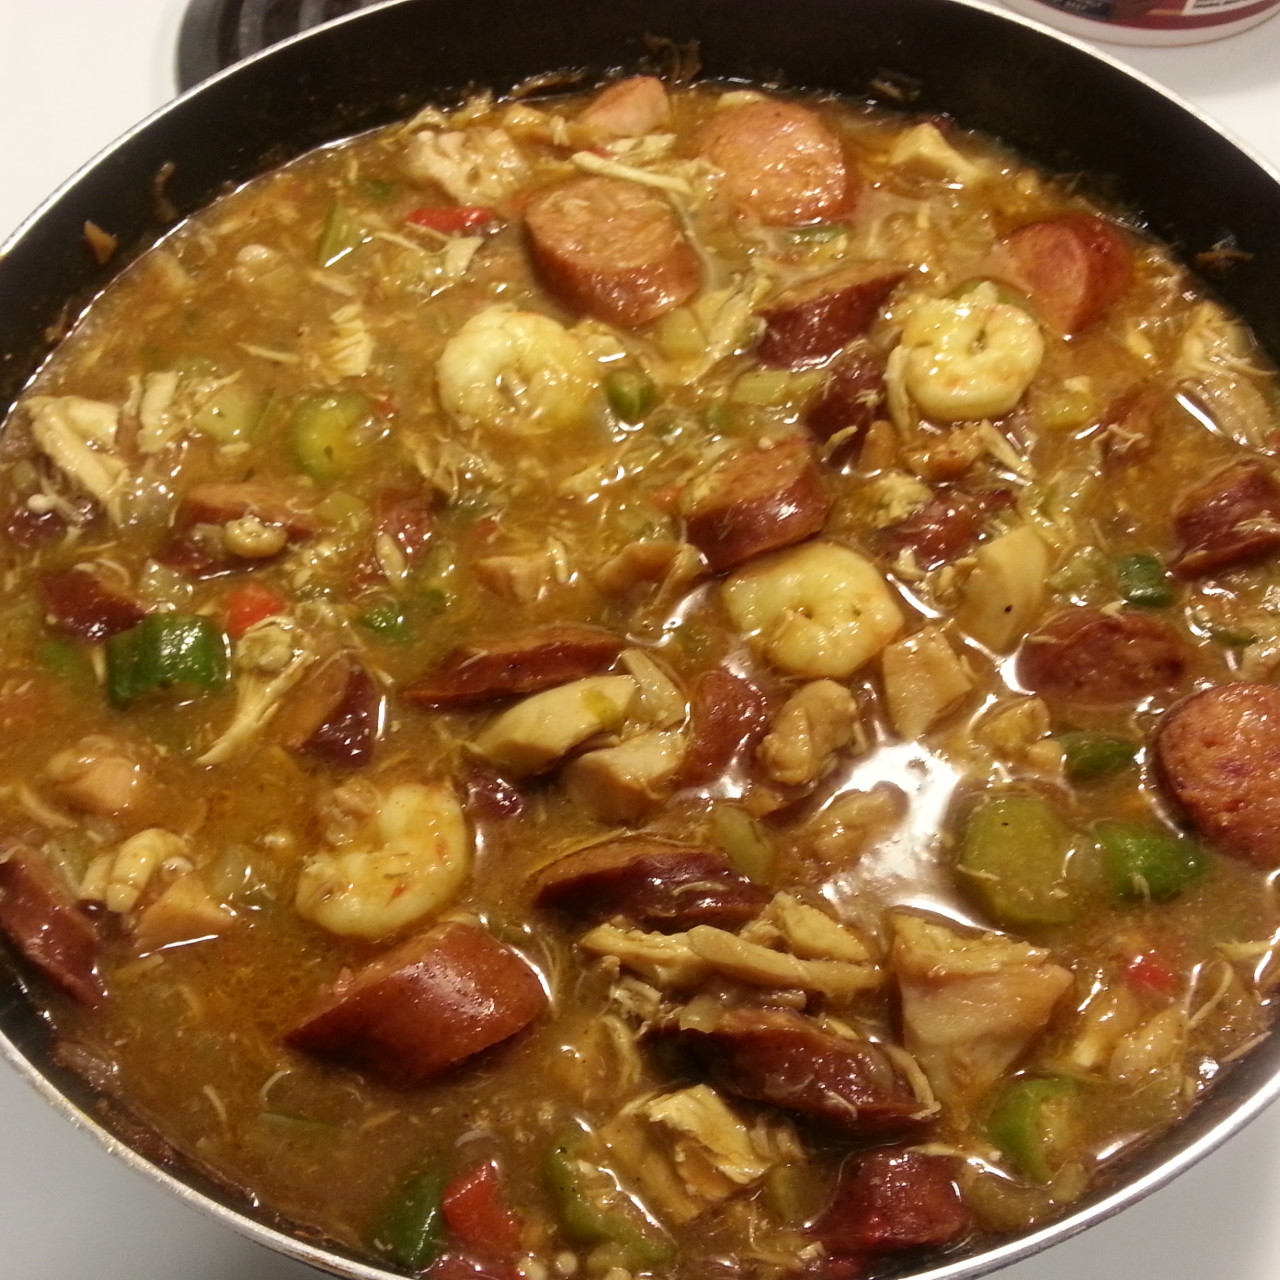 https://bigoven-res.cloudinary.com/image/upload/t_recipe-1280/new-orleans-creole-gumbo.jpg